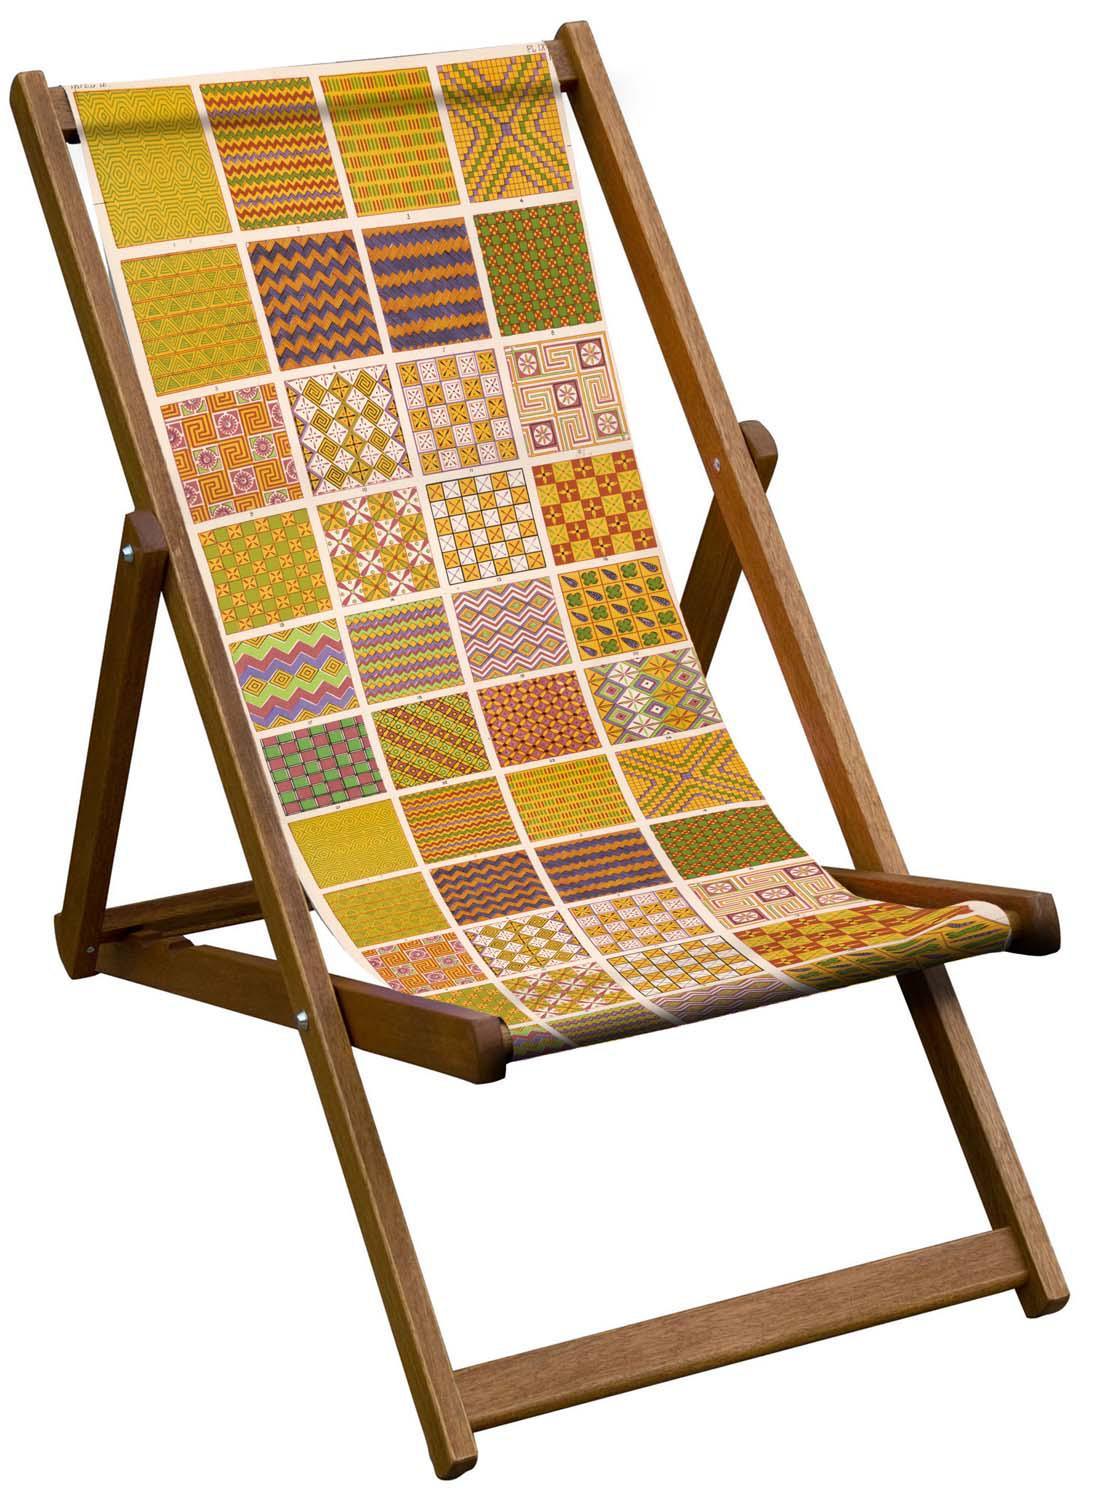 Egyptian VI -Deckchairs - Deck Chairs & Outdoor Chairs